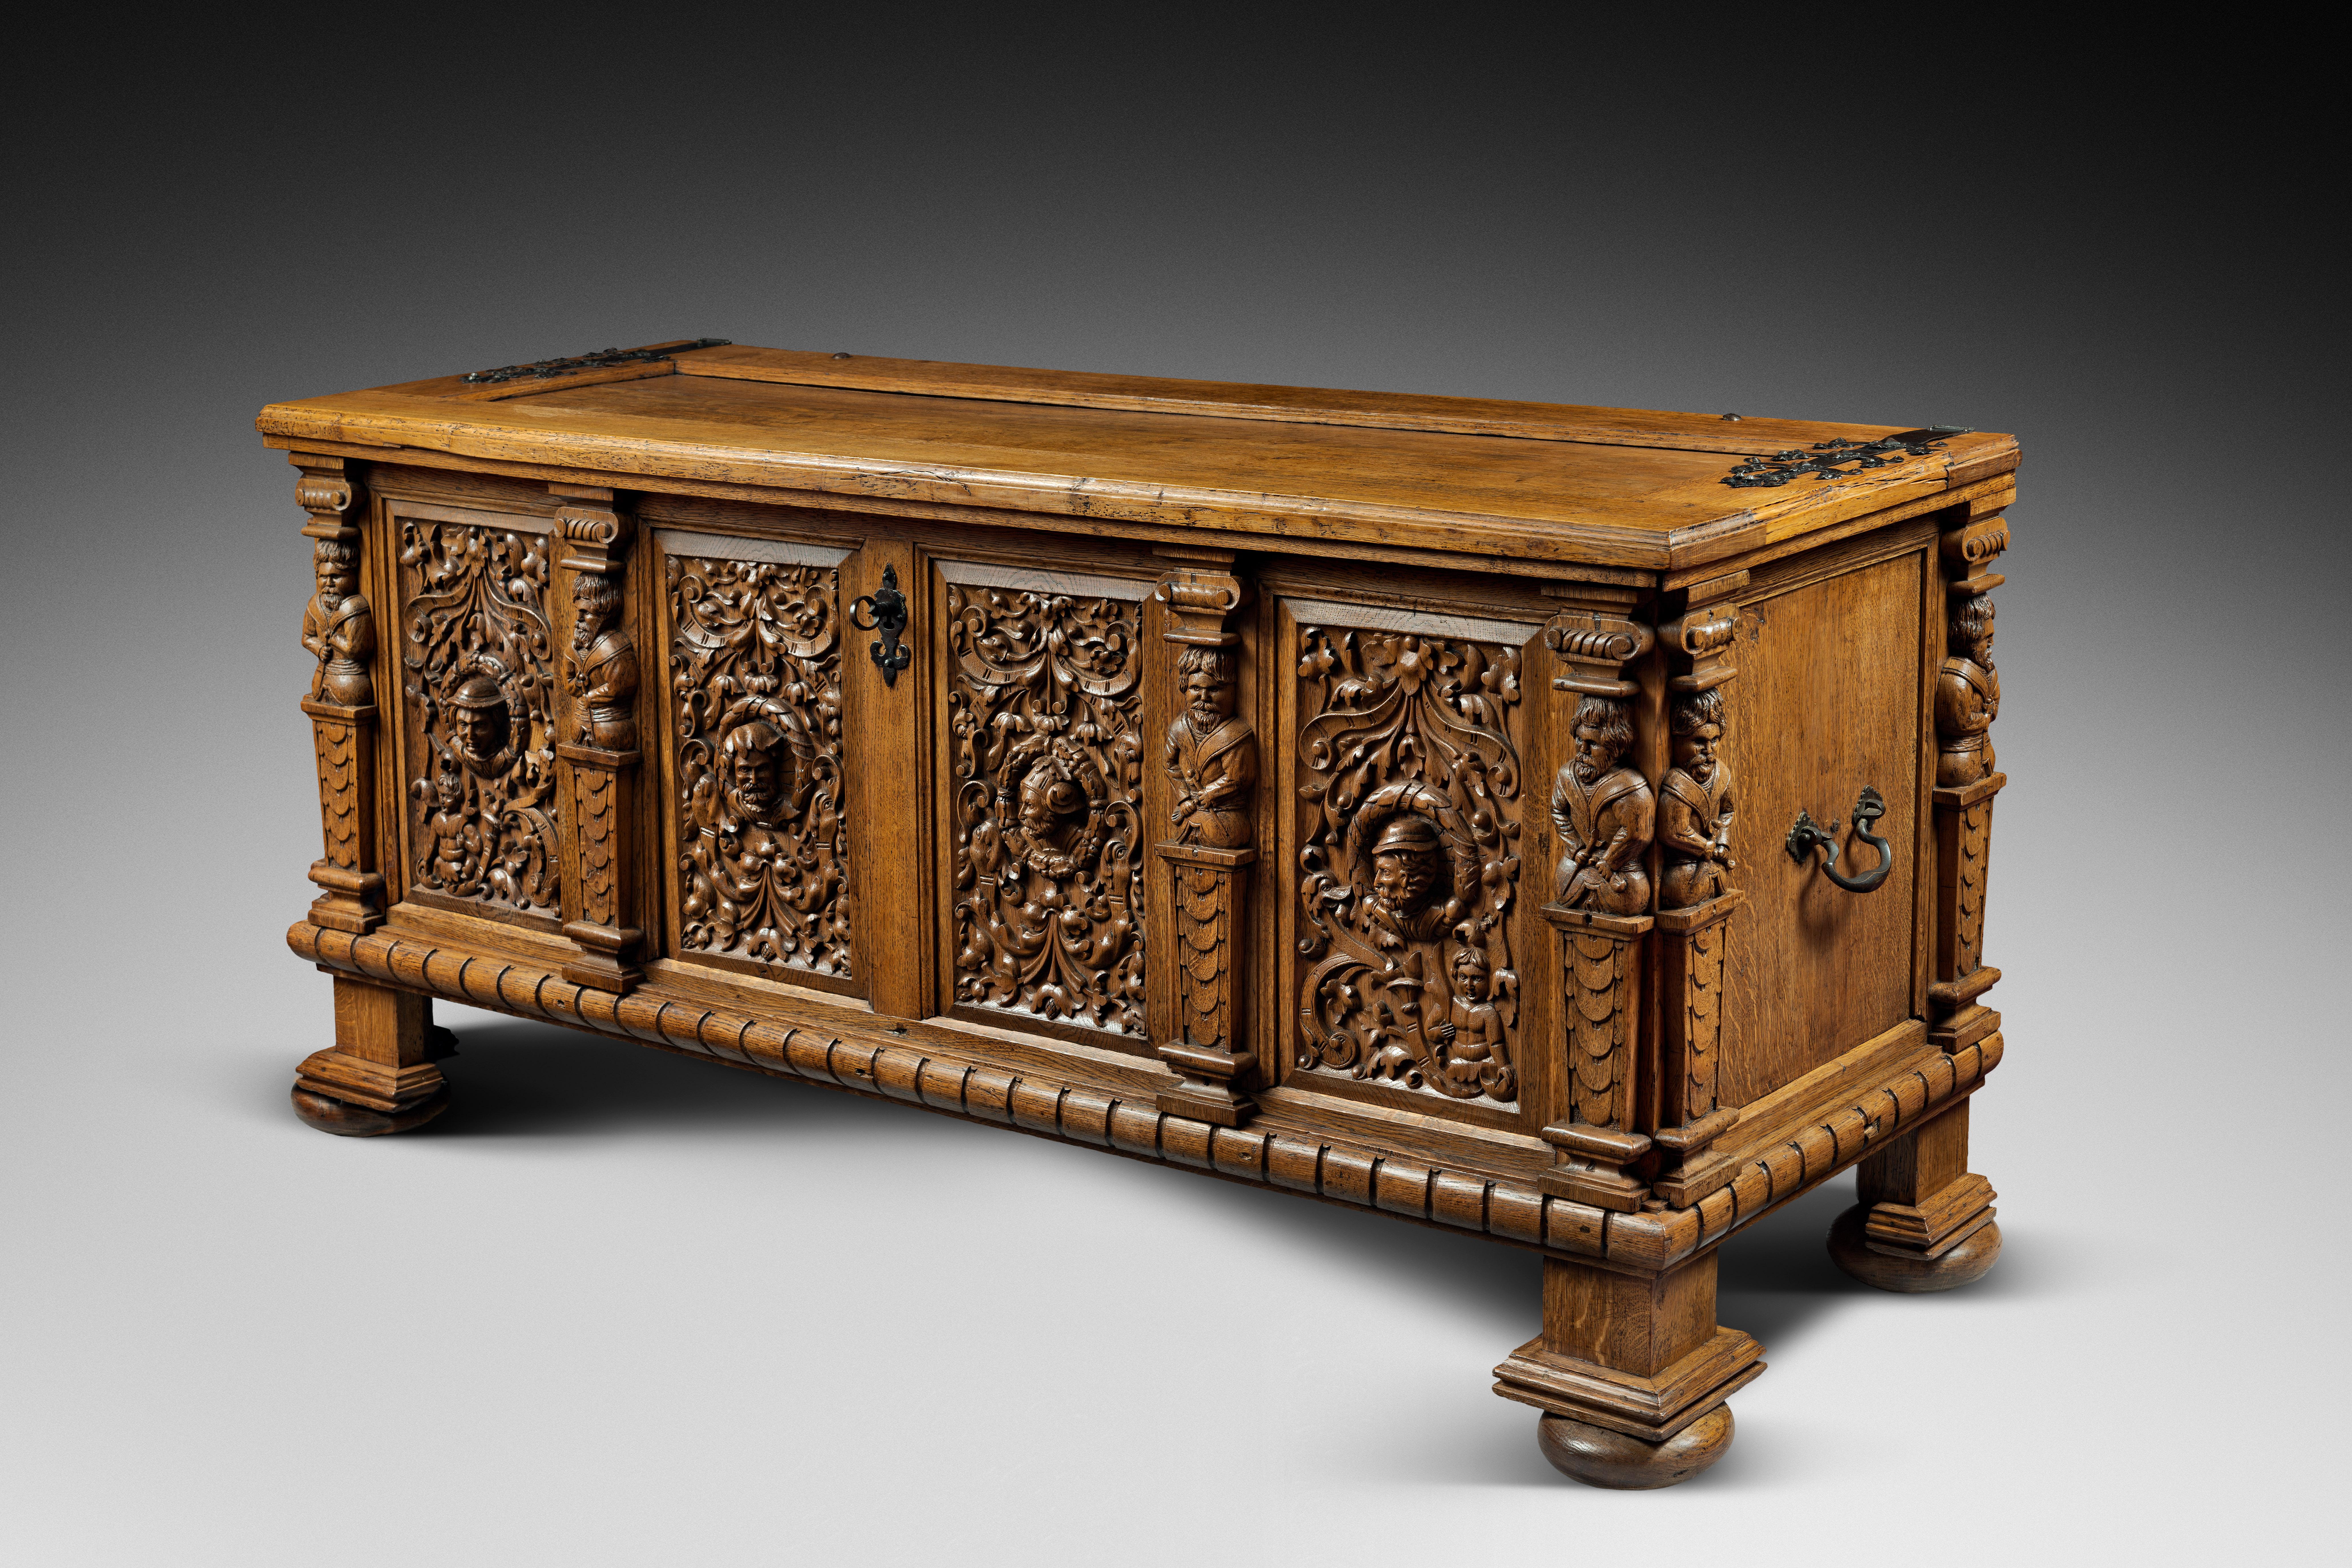 Carved Rare and Important German Renaissance Chest For Sale